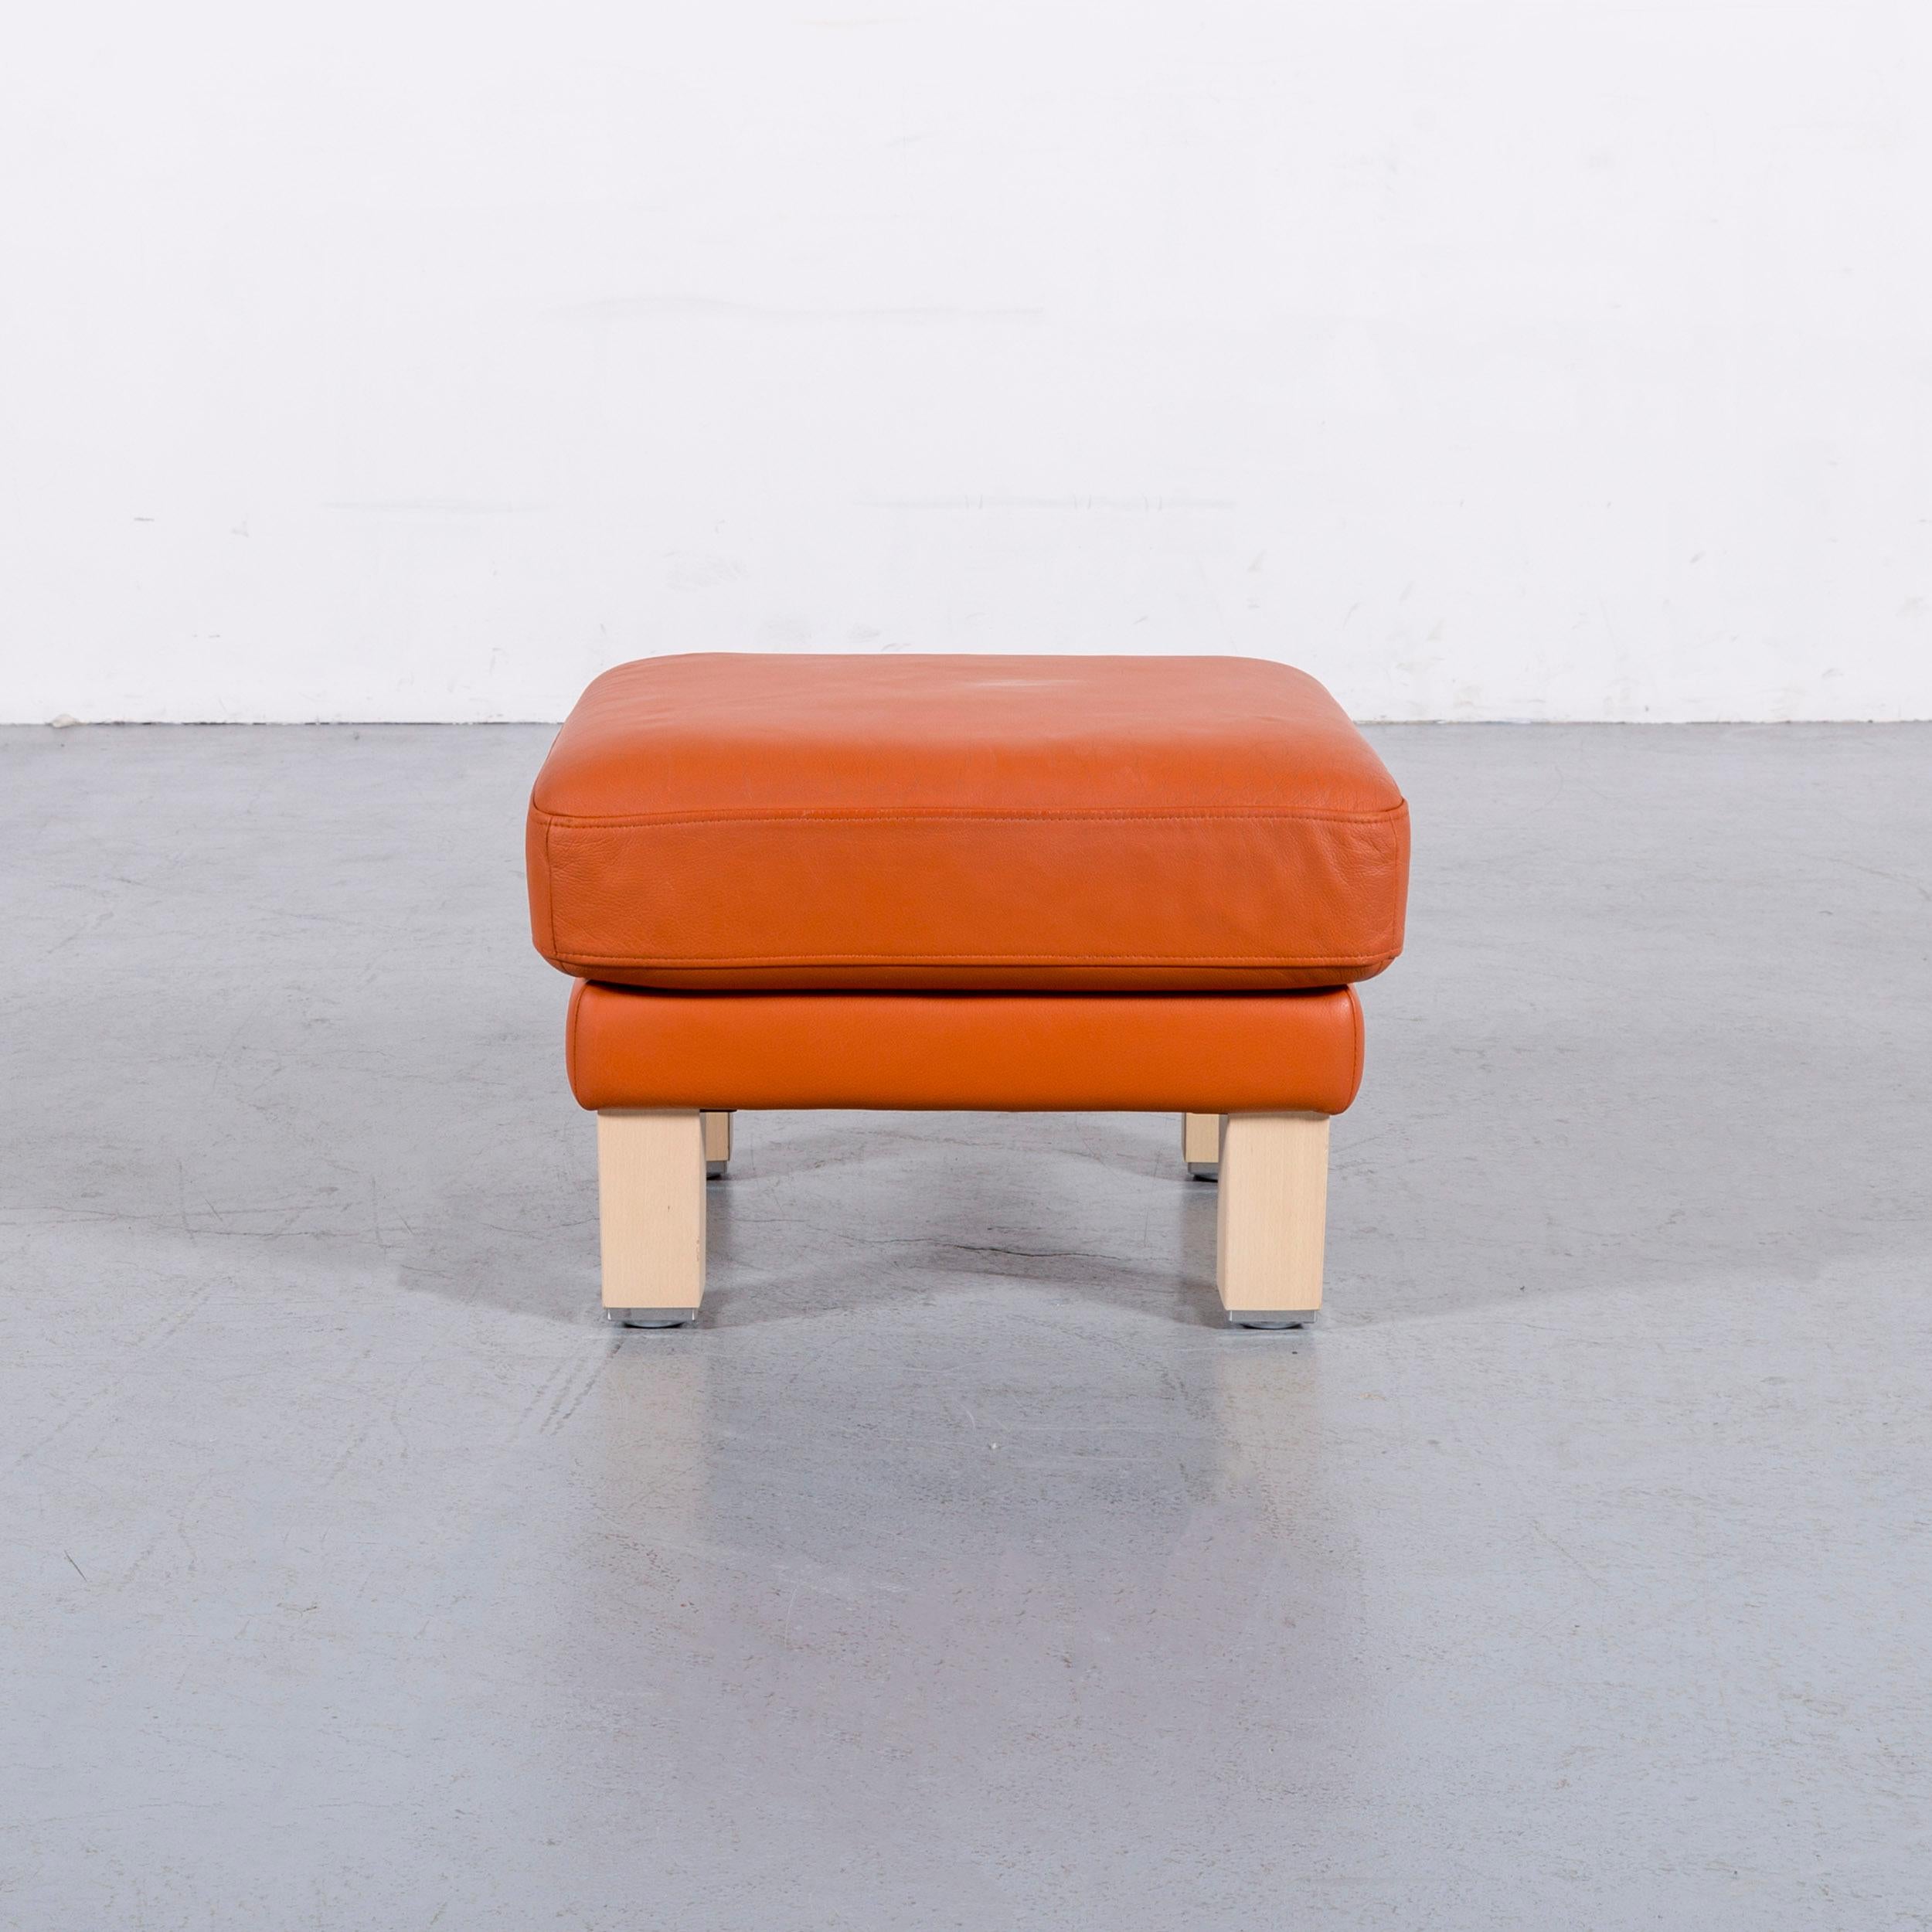 Rolf Benz Leather Foot-Stool Orange Bench For Sale 2